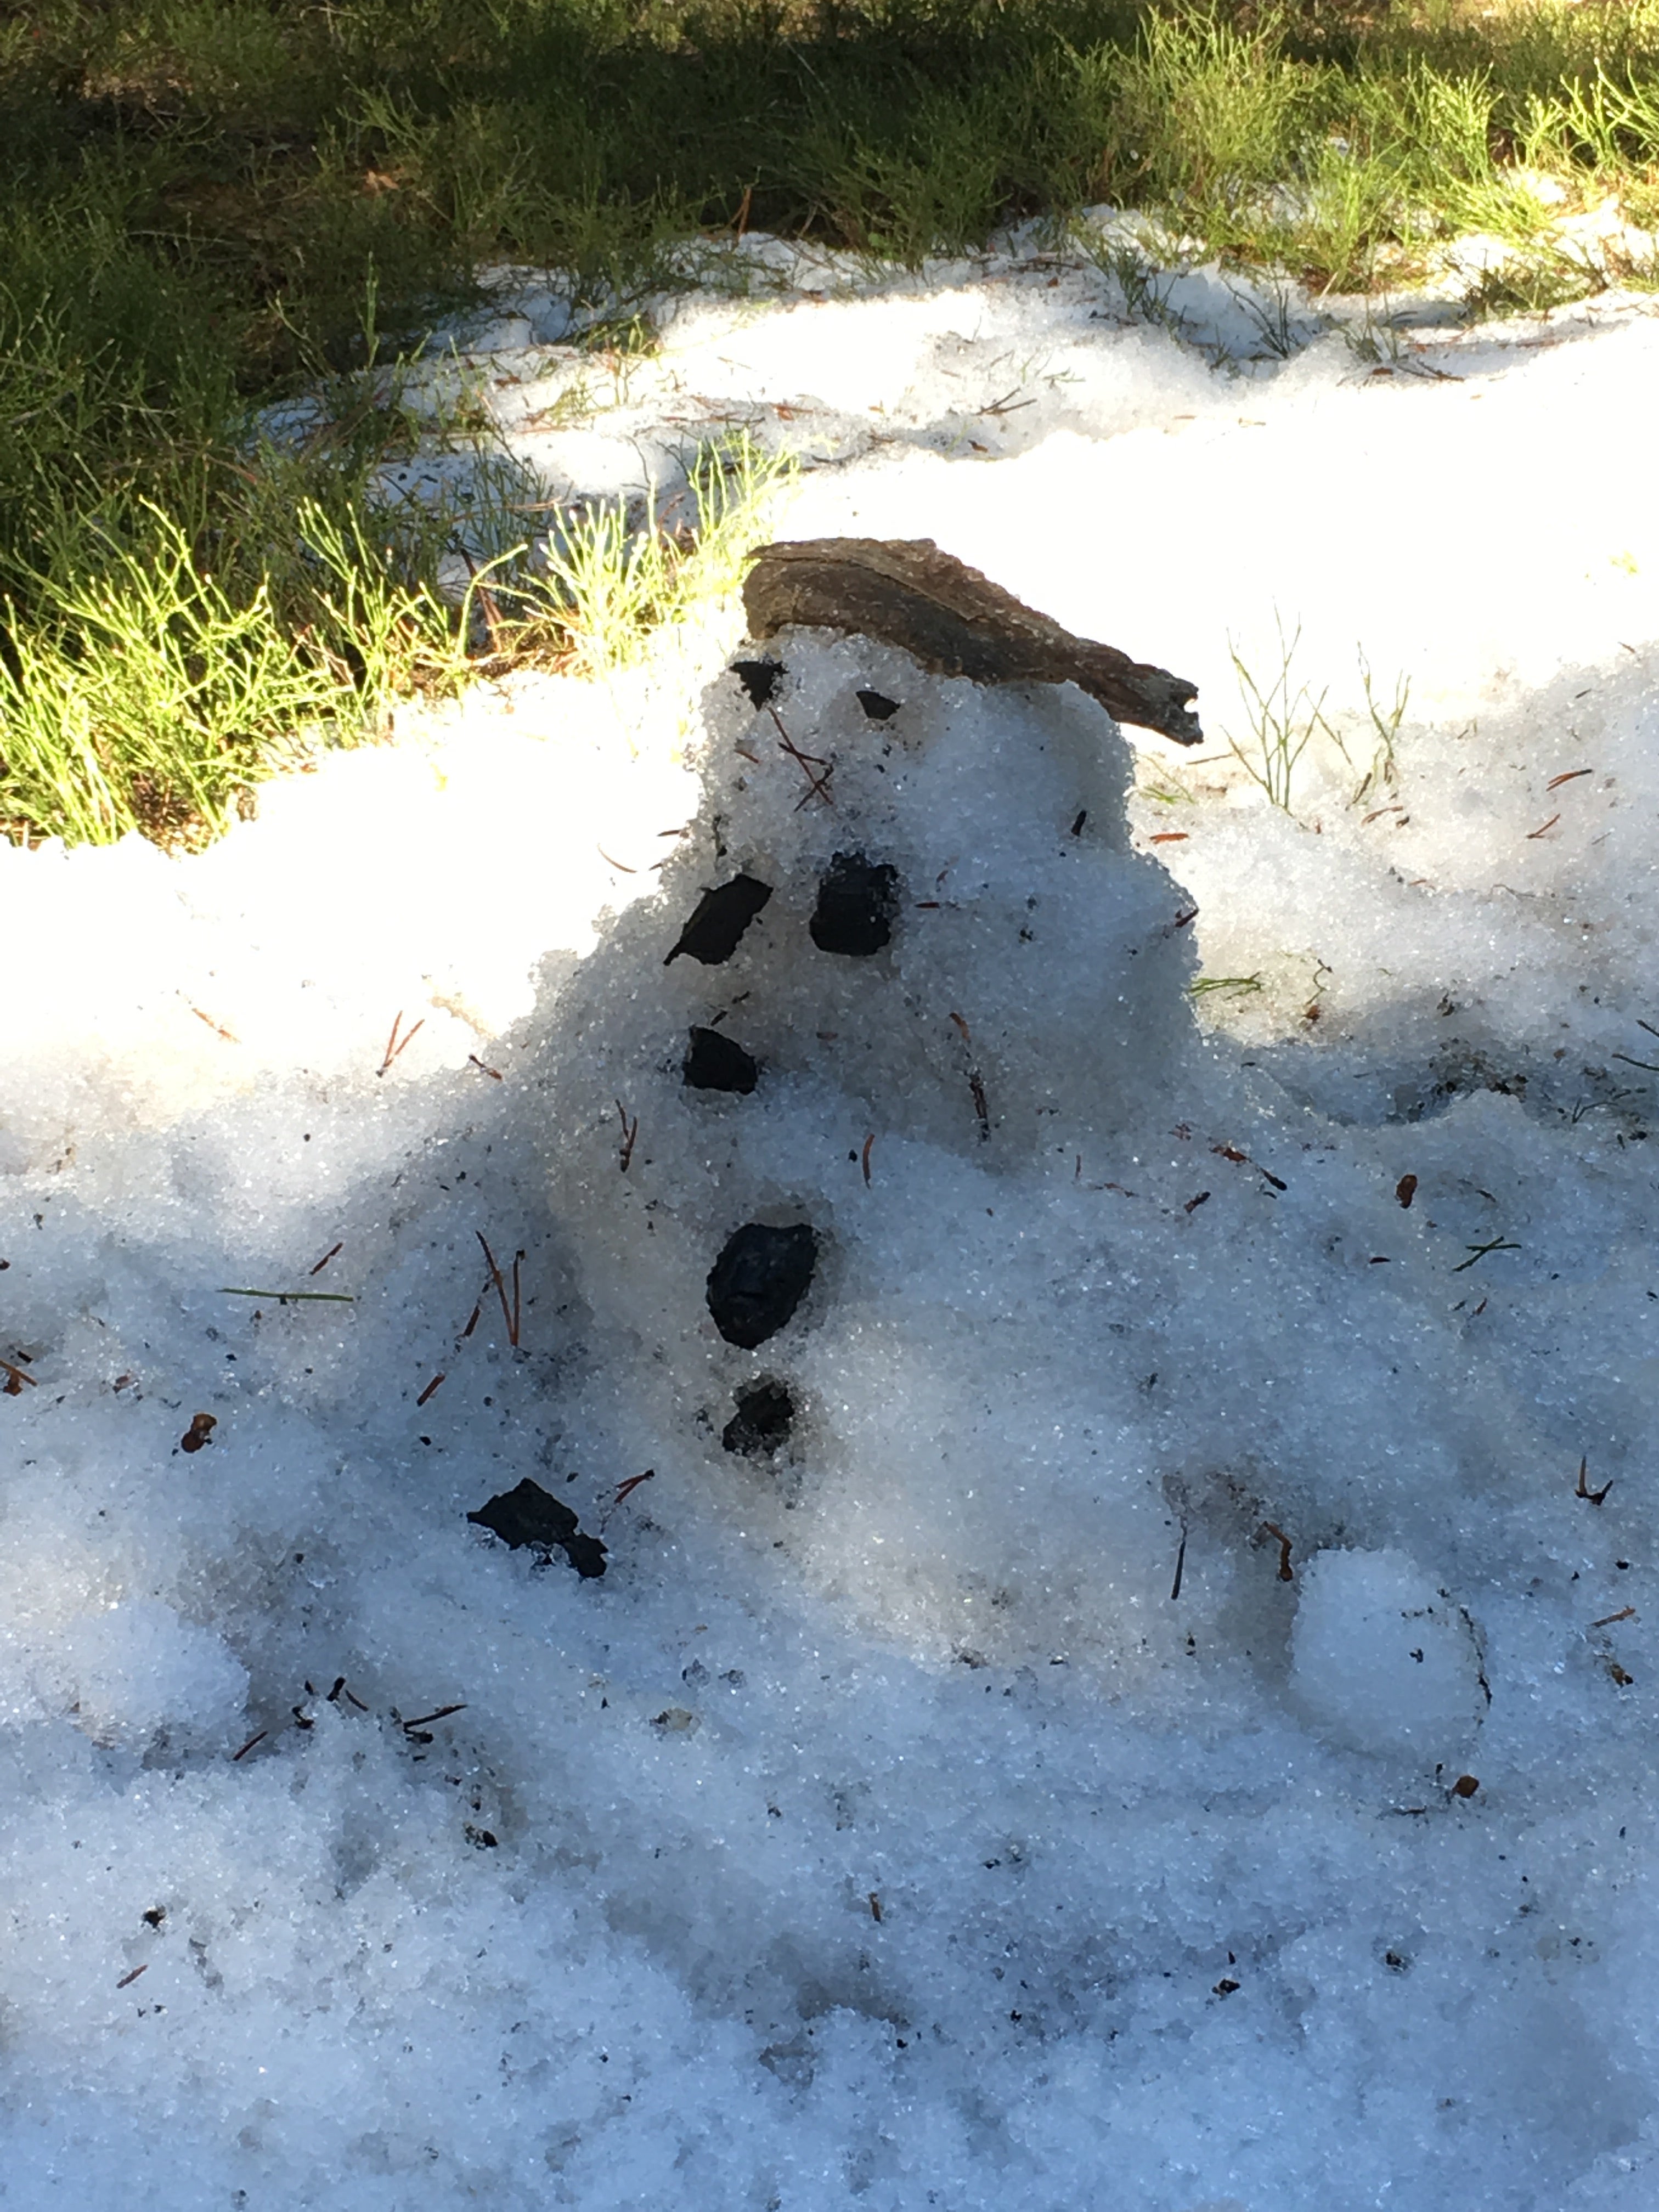 There was still some snow in one of the sites, so a snowman camped there